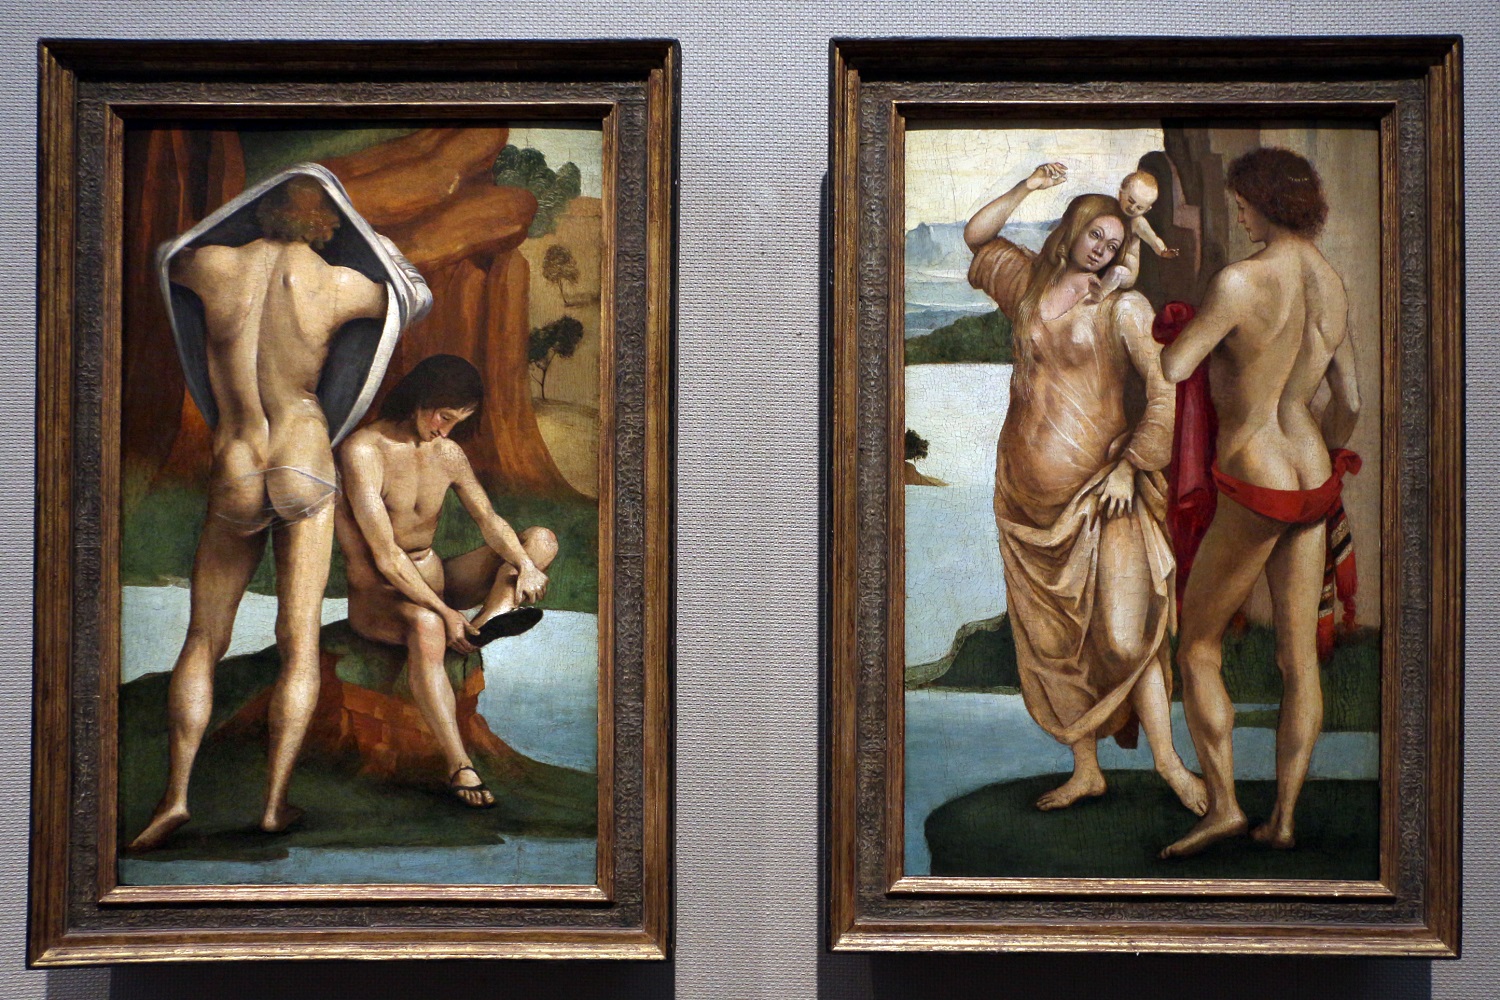 1488-90 Signorelli_-_Figures_in_a_Landscape_-_Two_Nude_Youths_-_Toledo_Museum_of_Art from Cappella Bichi, Sant'Agostino (Siena) 69.2 cm